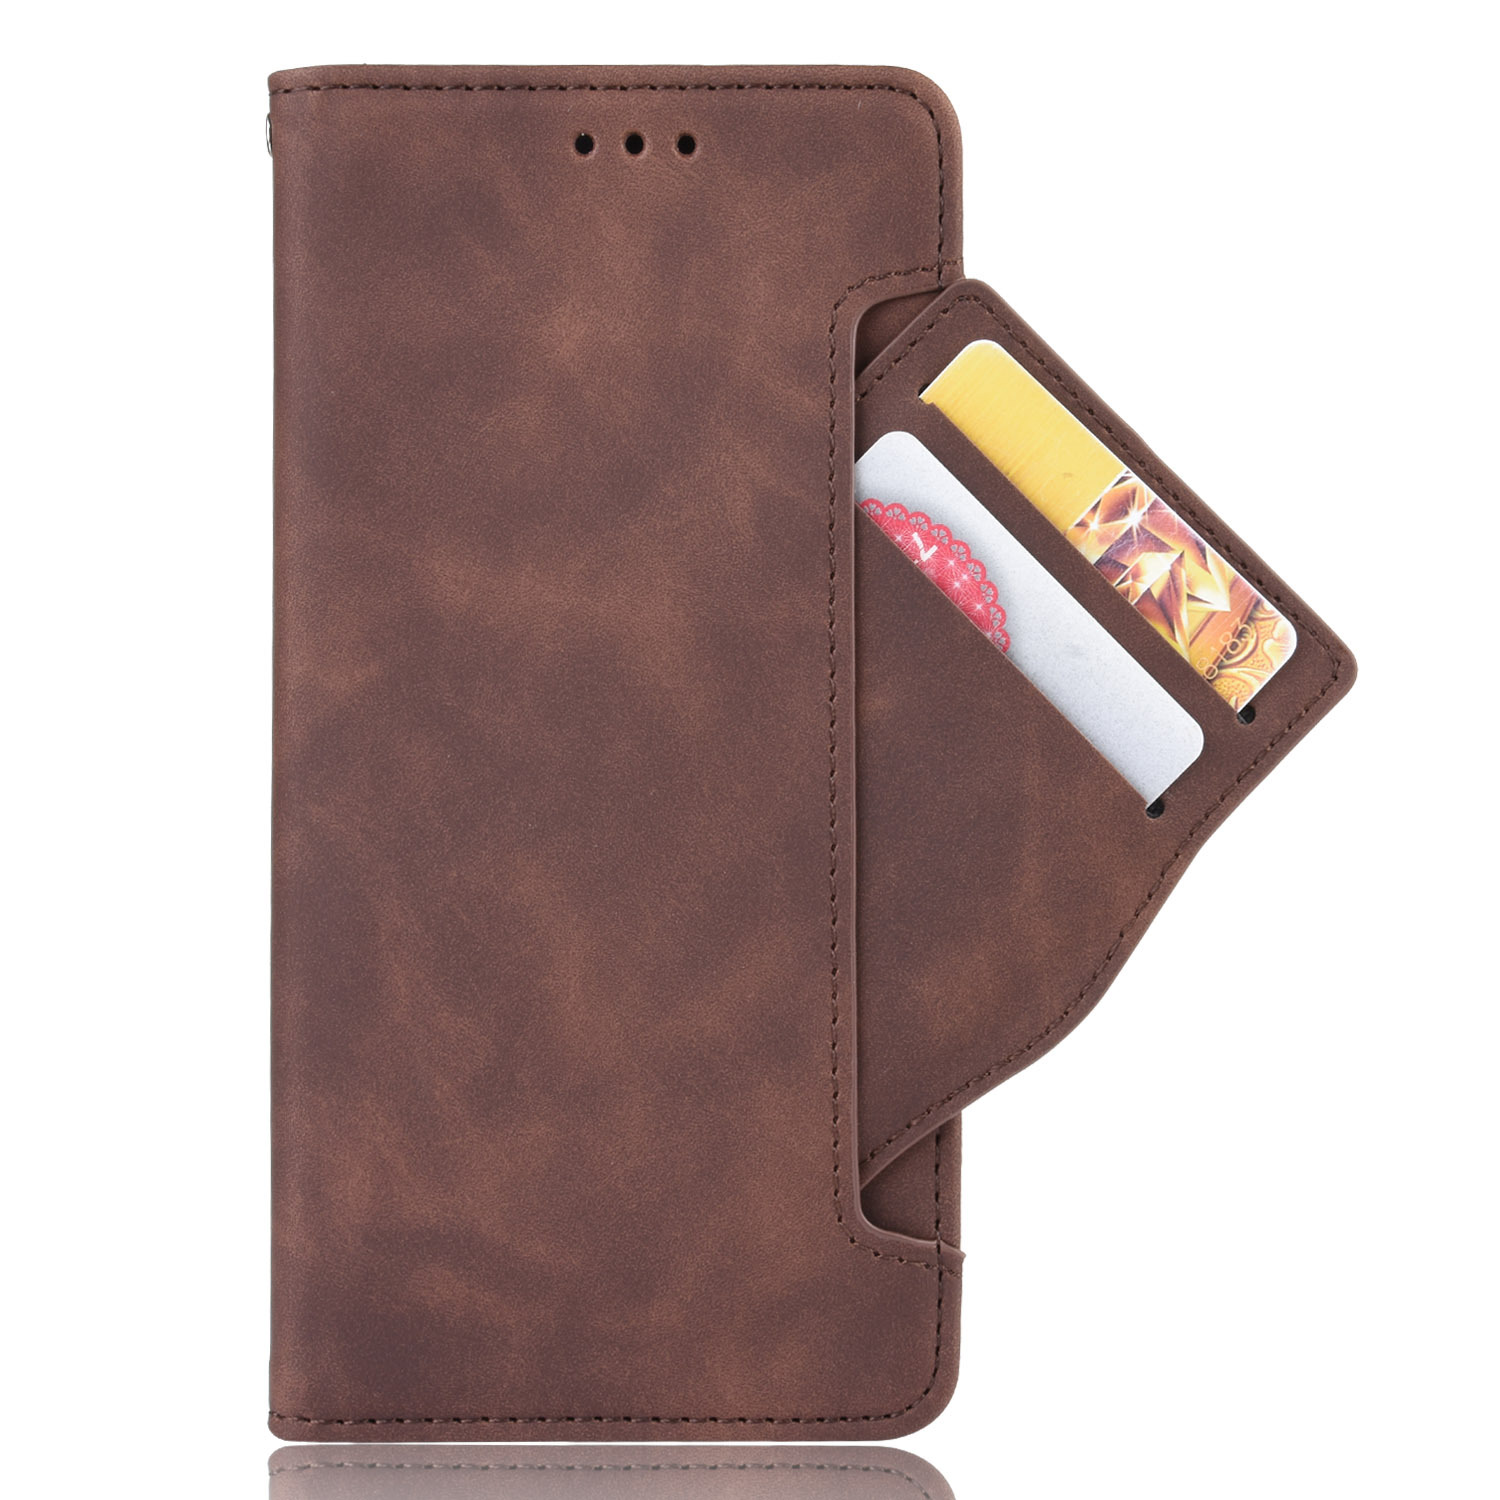 Bakeey-for-Ulefone-Armor-11-5G-Armor-11T-5G-Case-Magnetic-Flip-with-Multiple-Card-Slot-Wallet-Foldin-1915540-2